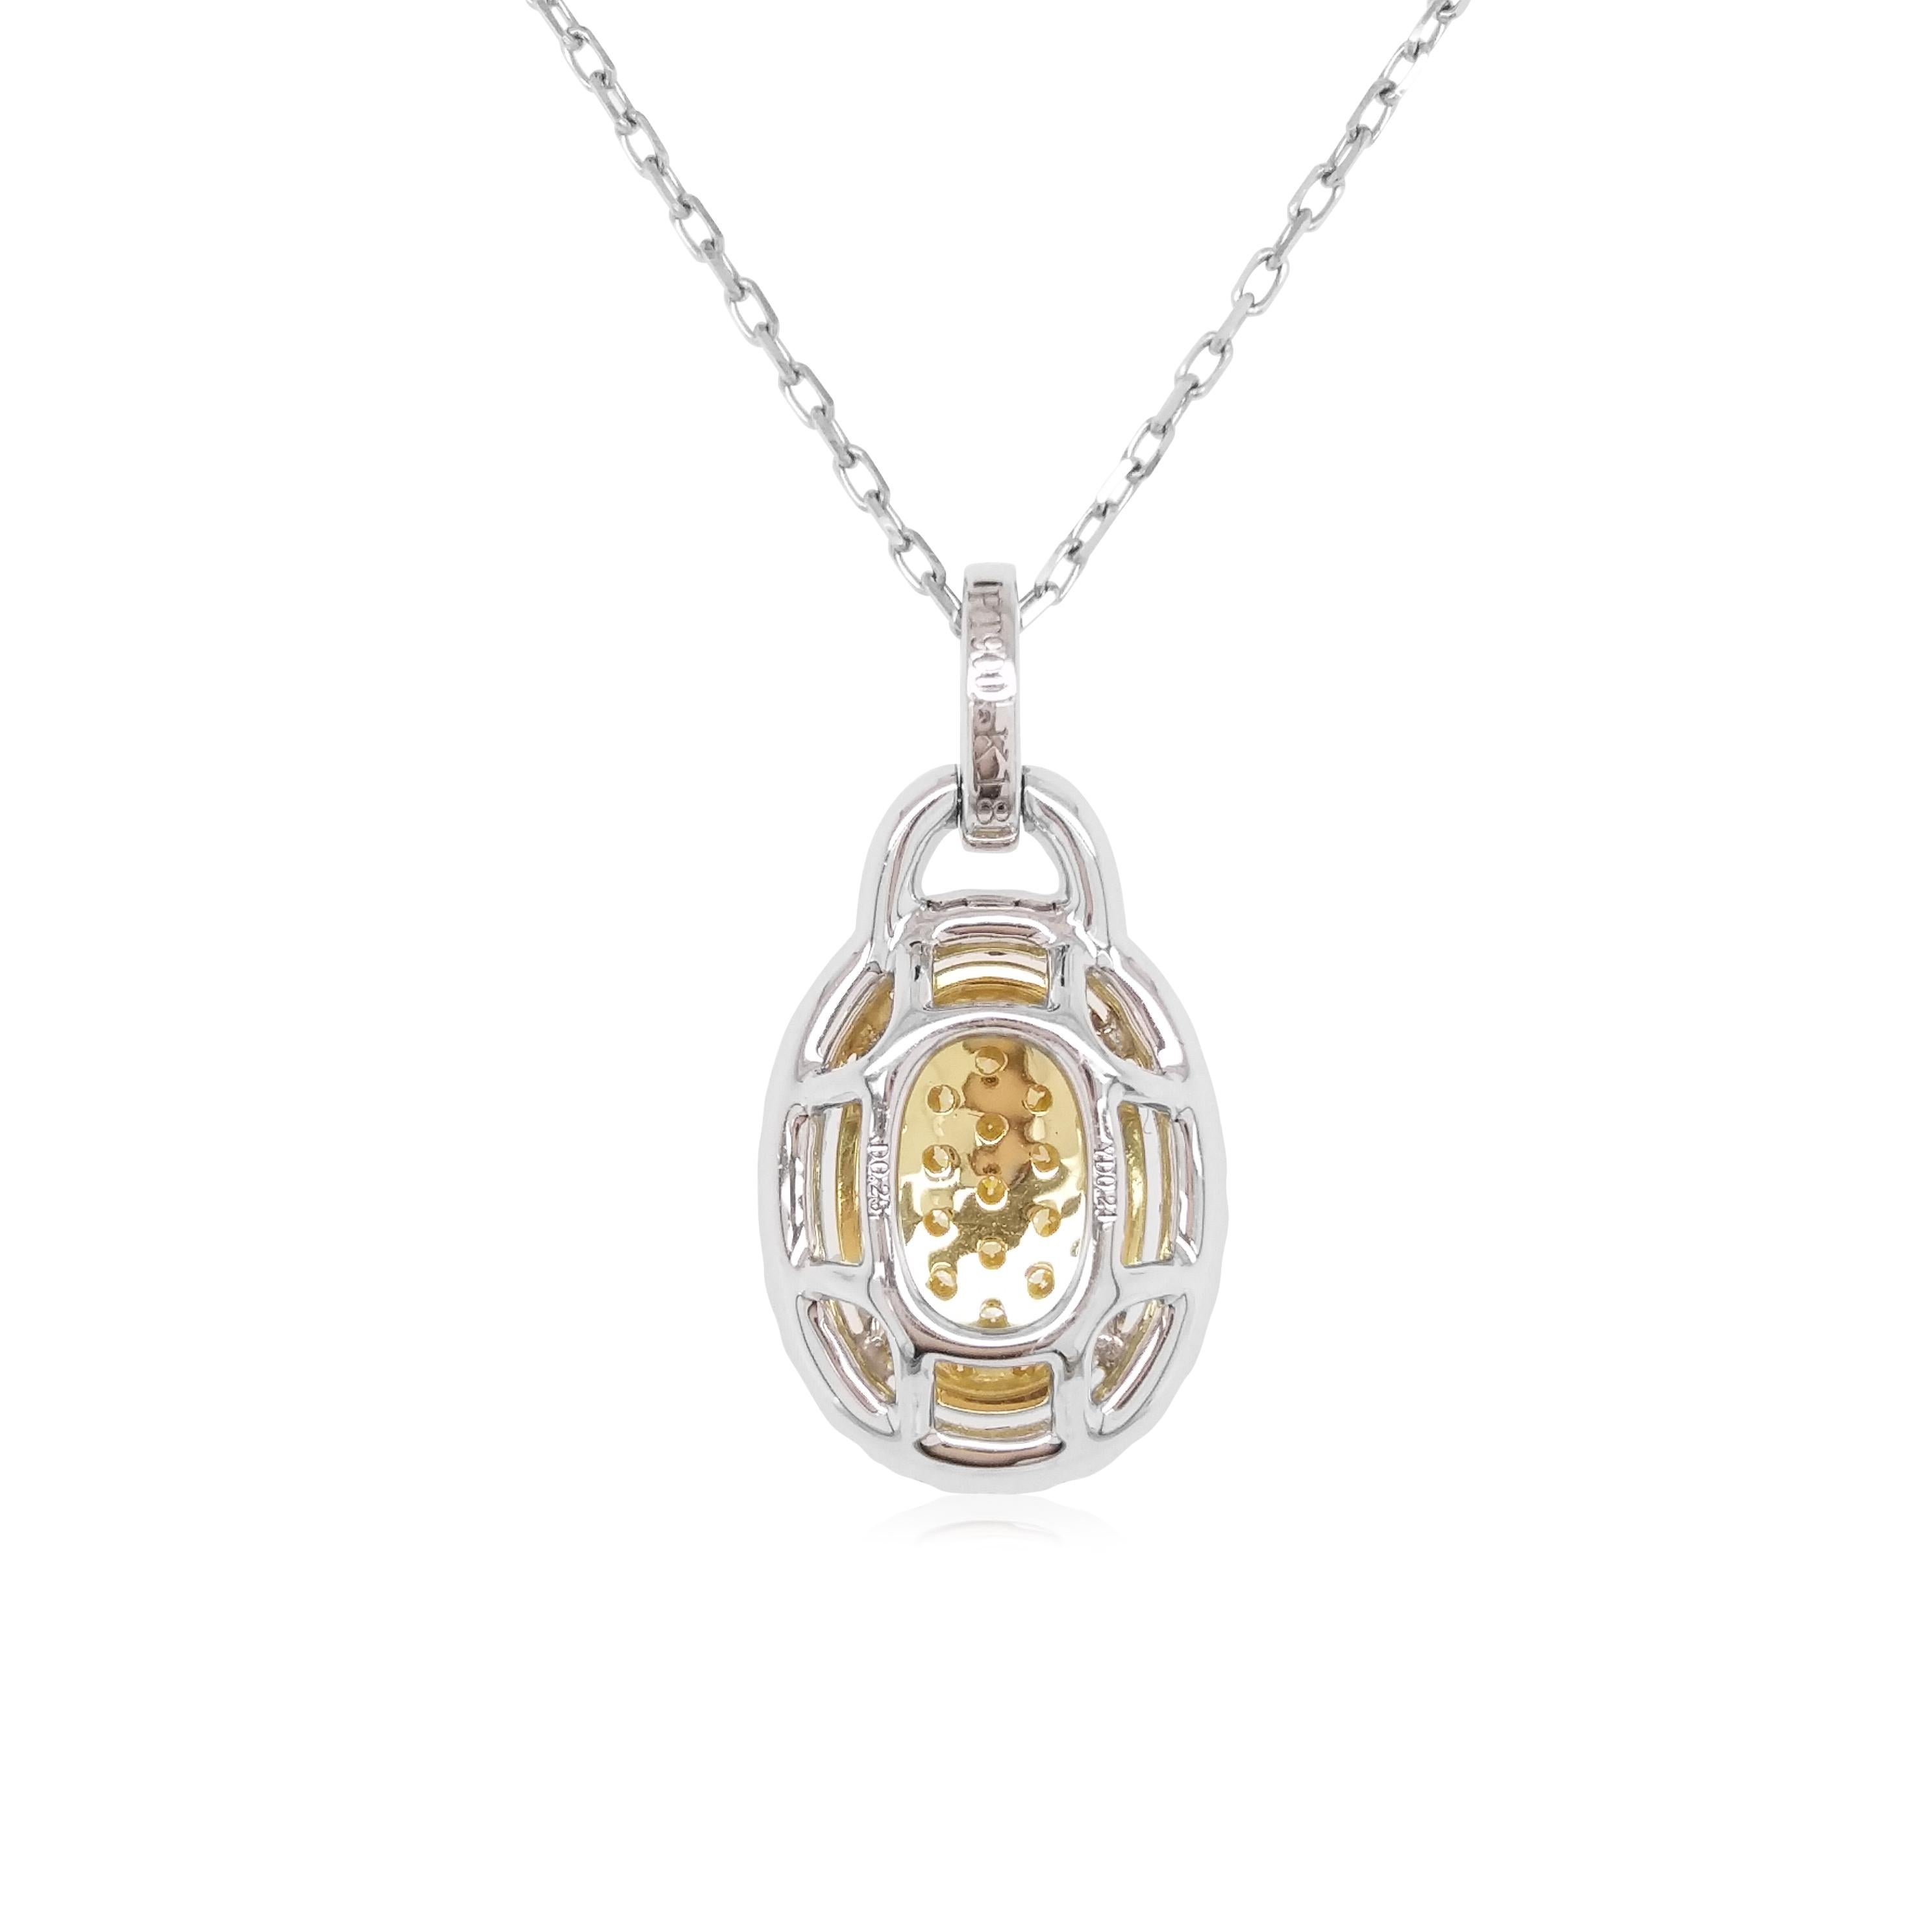 This unique pendant features striking natural Yellow diamonds at its forefront, surrounded by a halo of sparkling white diamonds. The perfect piece to take you from day to night, this pendant will elevate any outfit - especially when paired with the